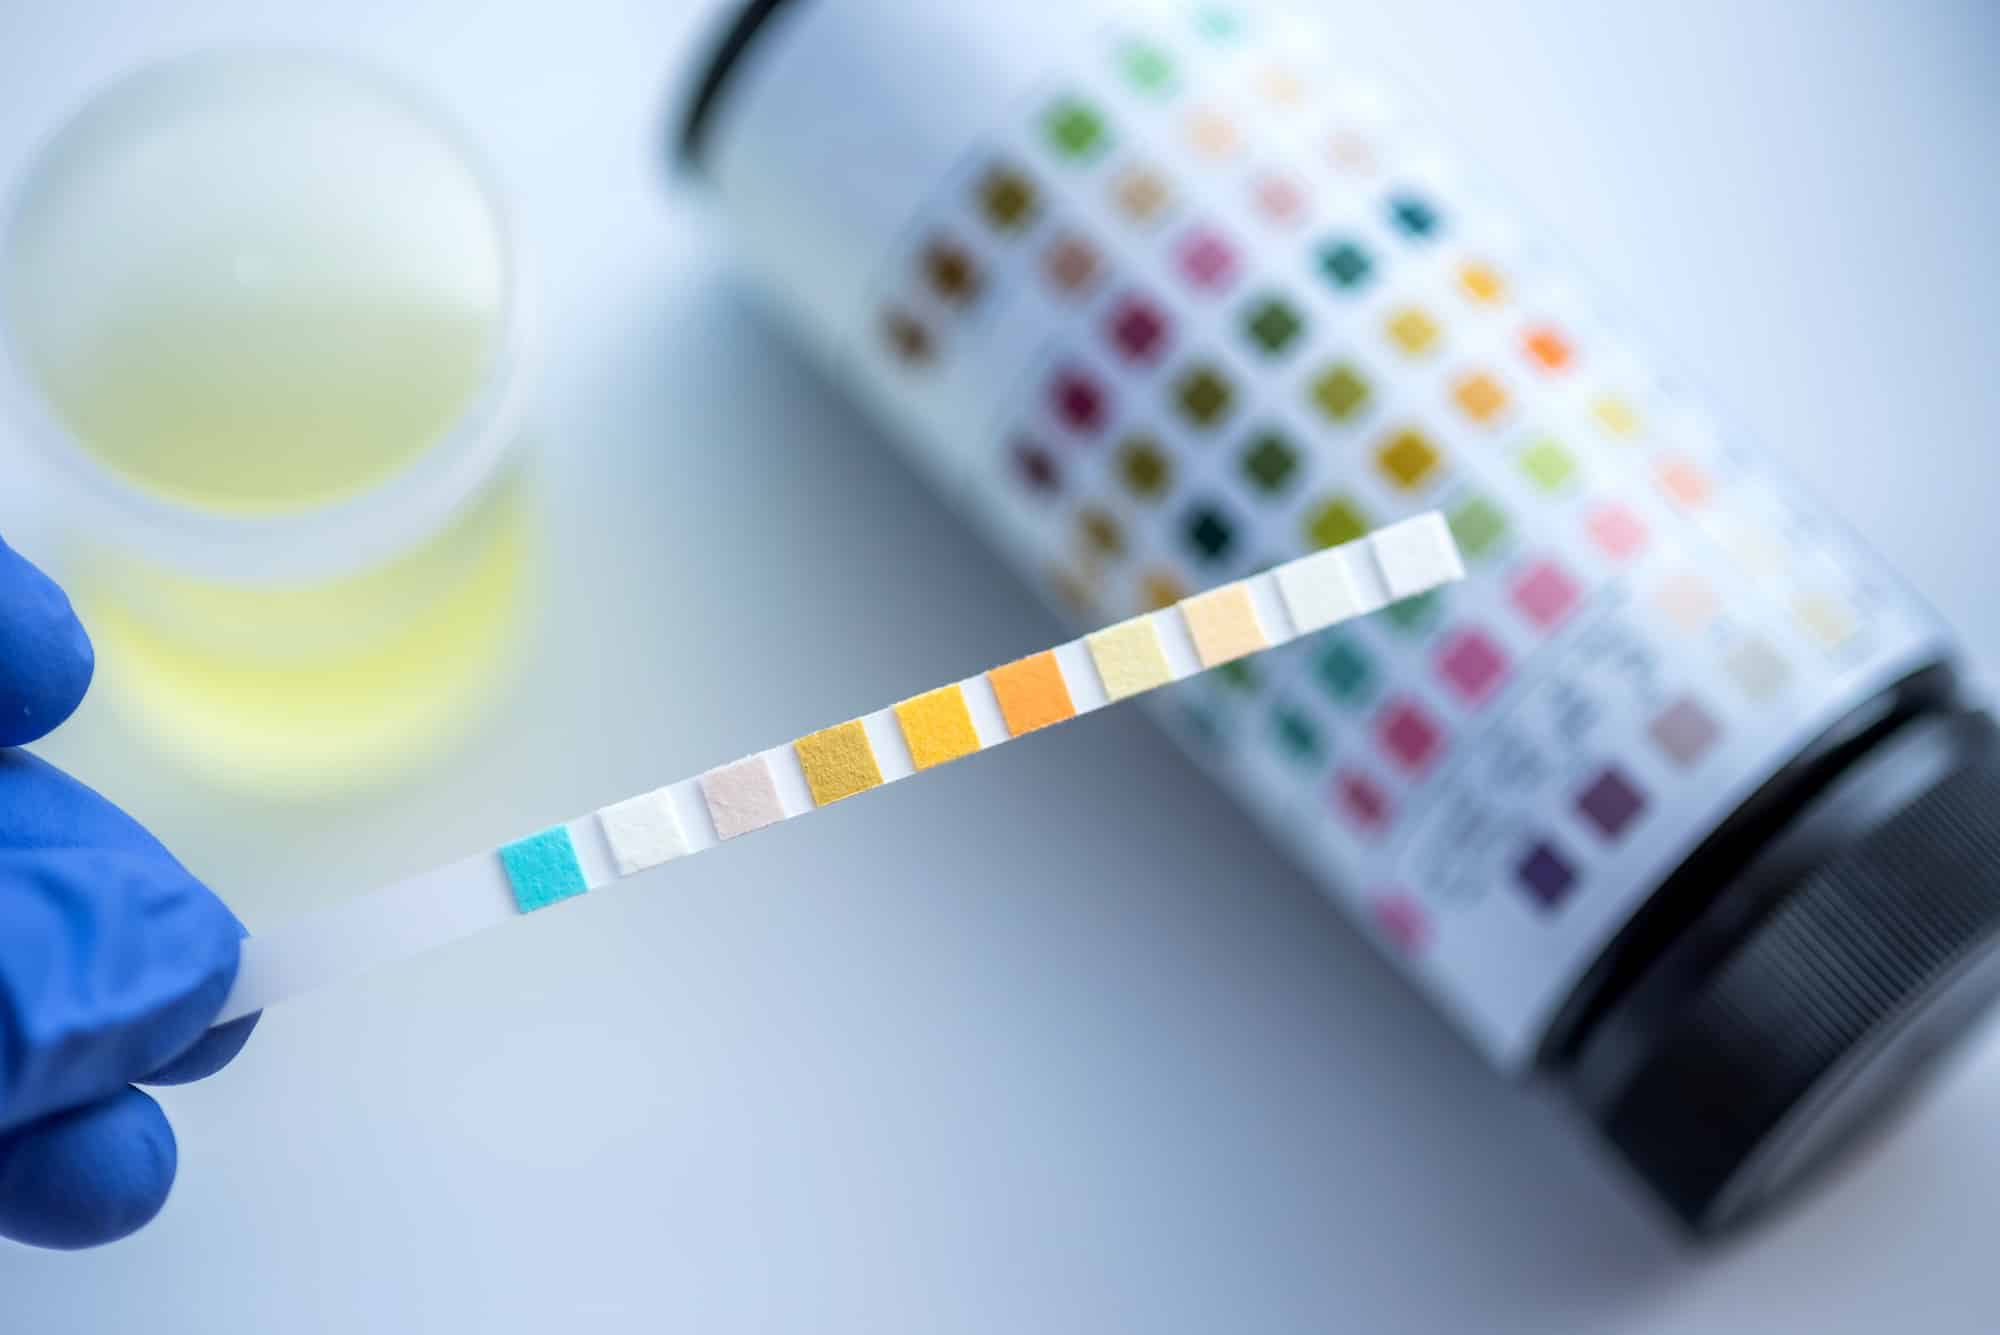 Should You Use In-House or External Alcohol and Drug Testing?